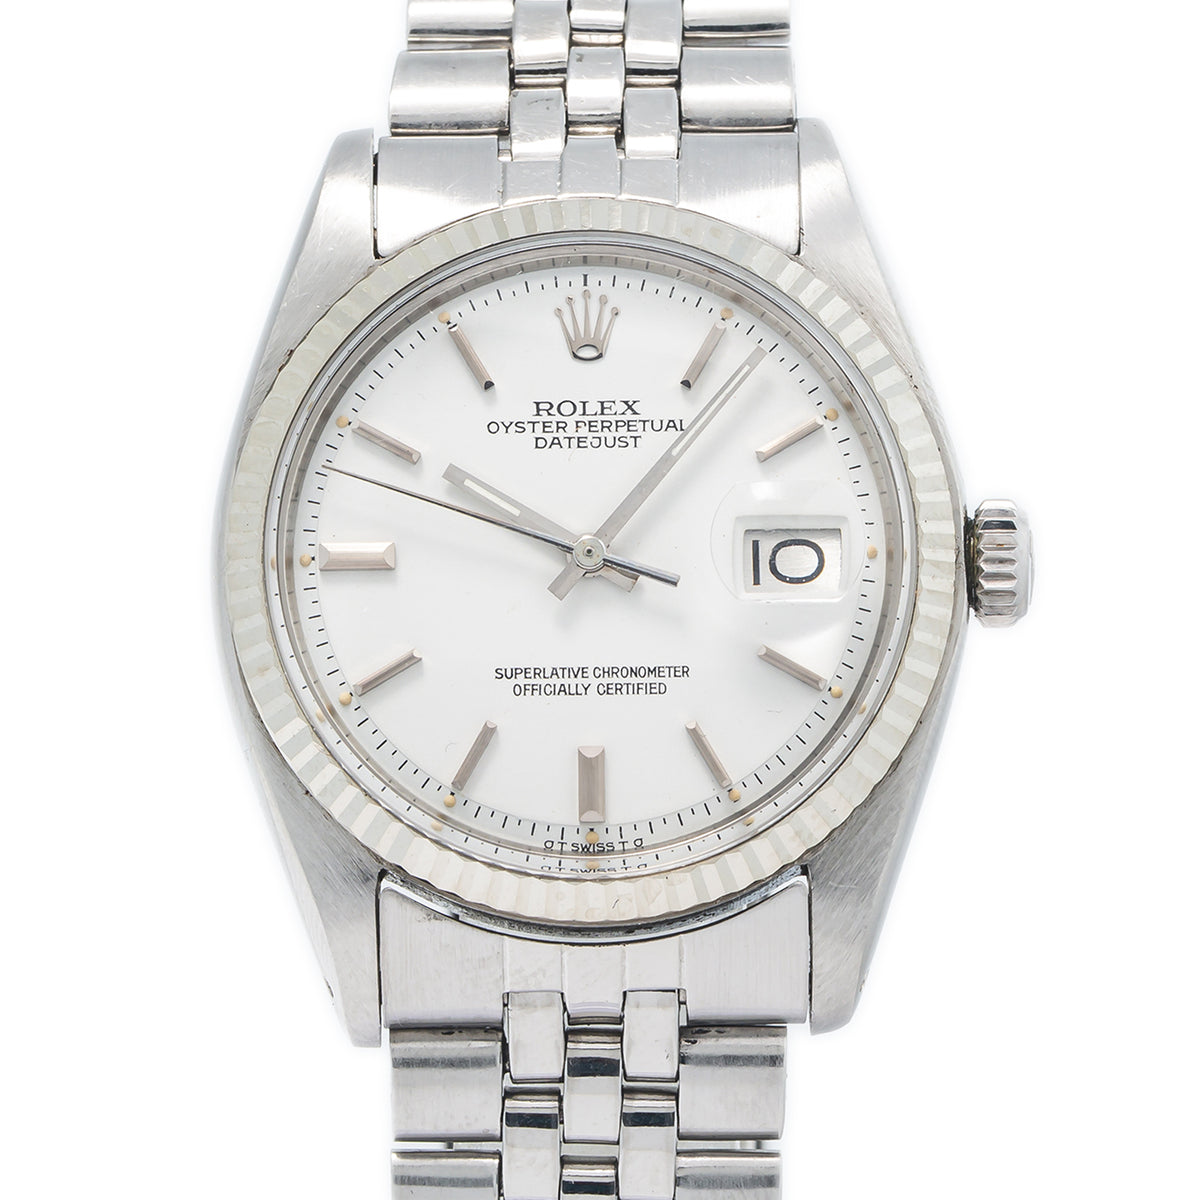 Rolex Datejust 1601 White Matte Sigma Dial Stainless Steel Jubilee Watch 36mm